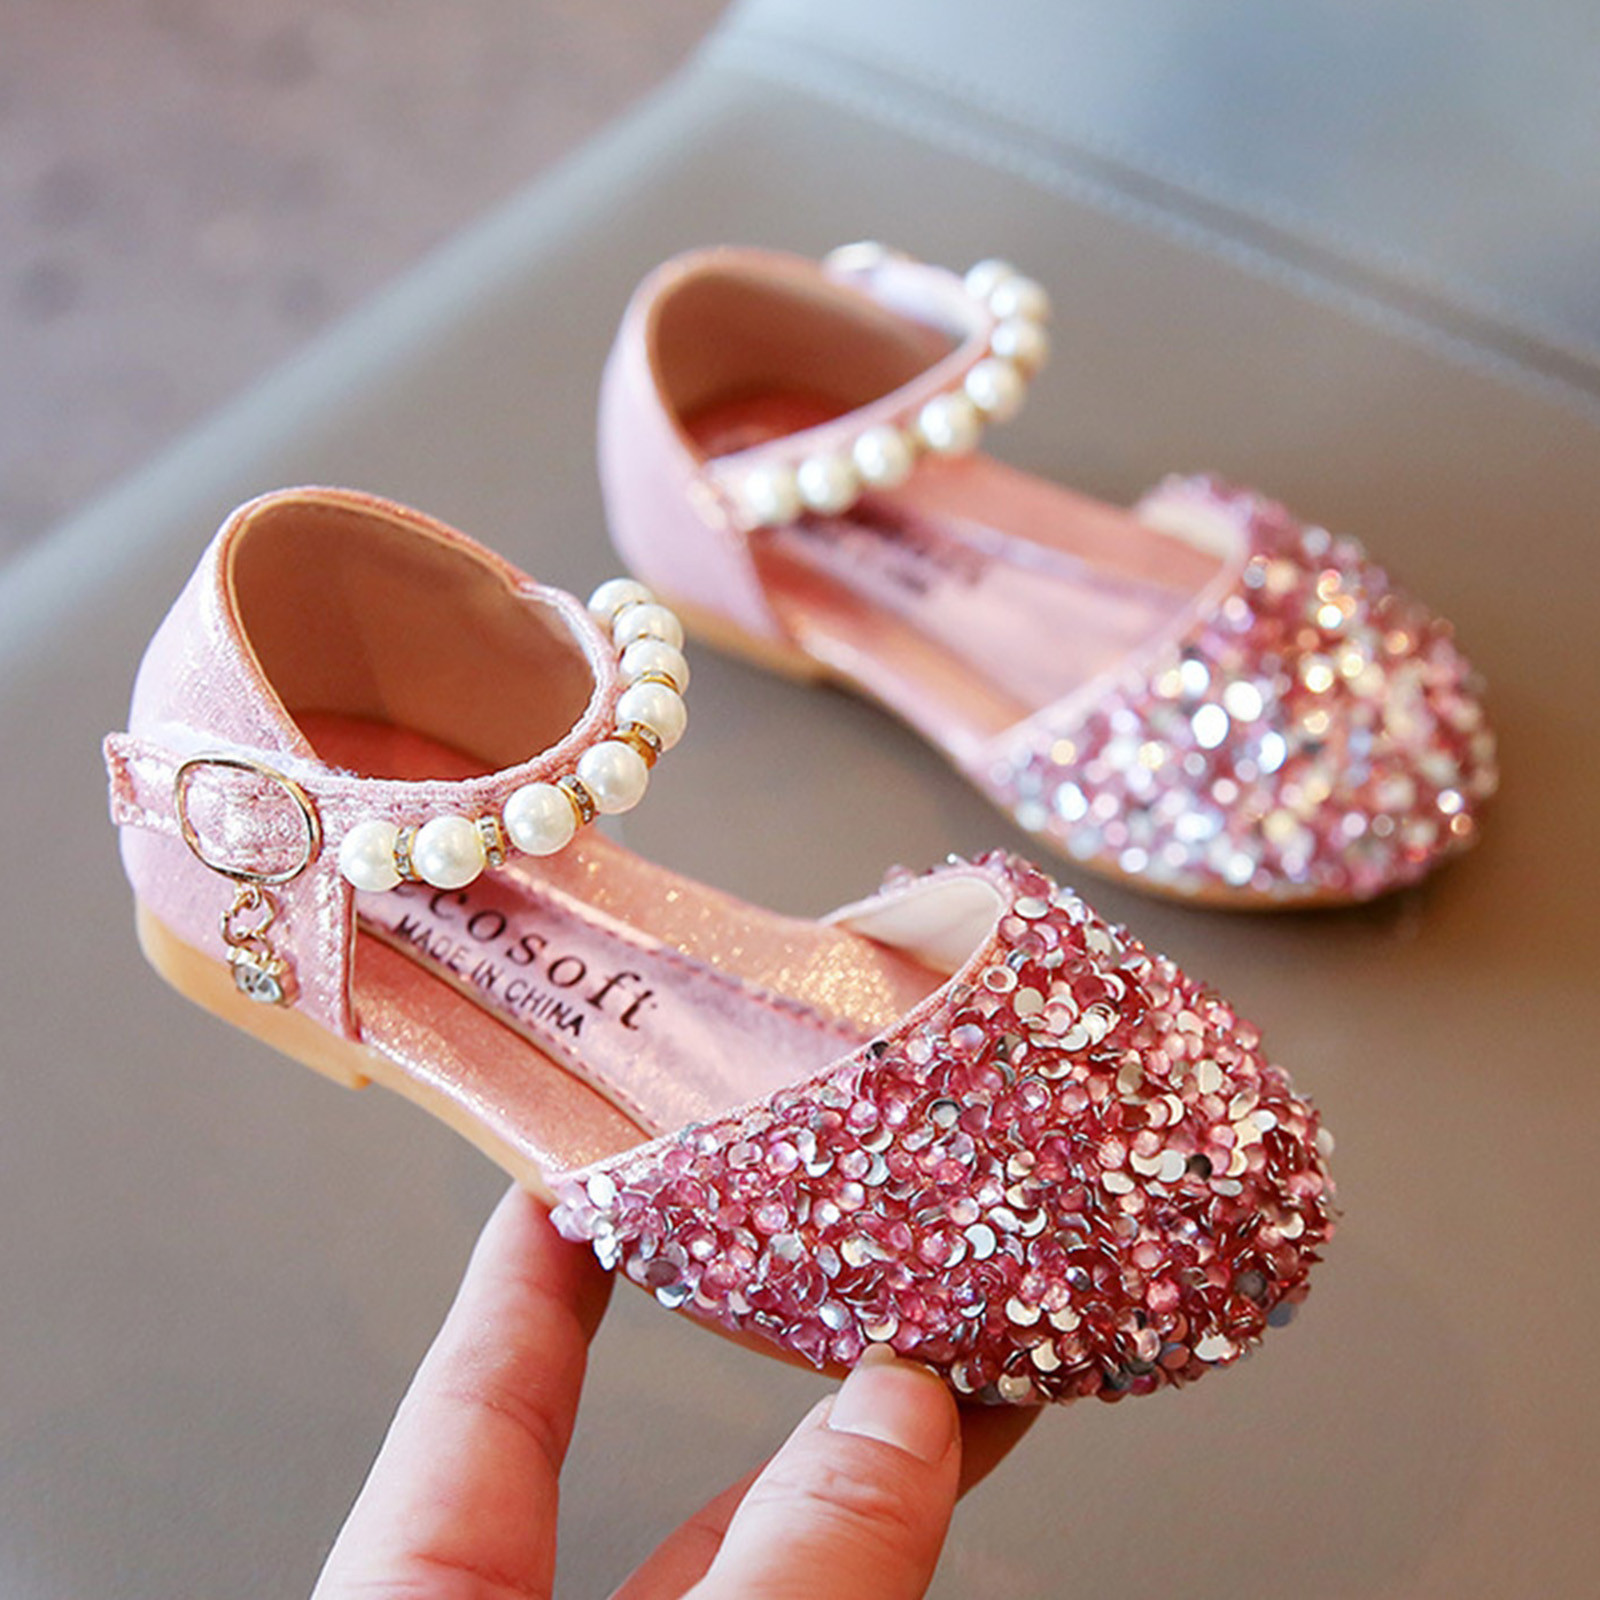 Cathalem Toddler Water Sandals Princess Pumps Dance Shoes Low Heels Rhinestone Sequins Girls Glitter Toddler Girls Jelly Sandals Sandal Pink 18 Months - image 4 of 4